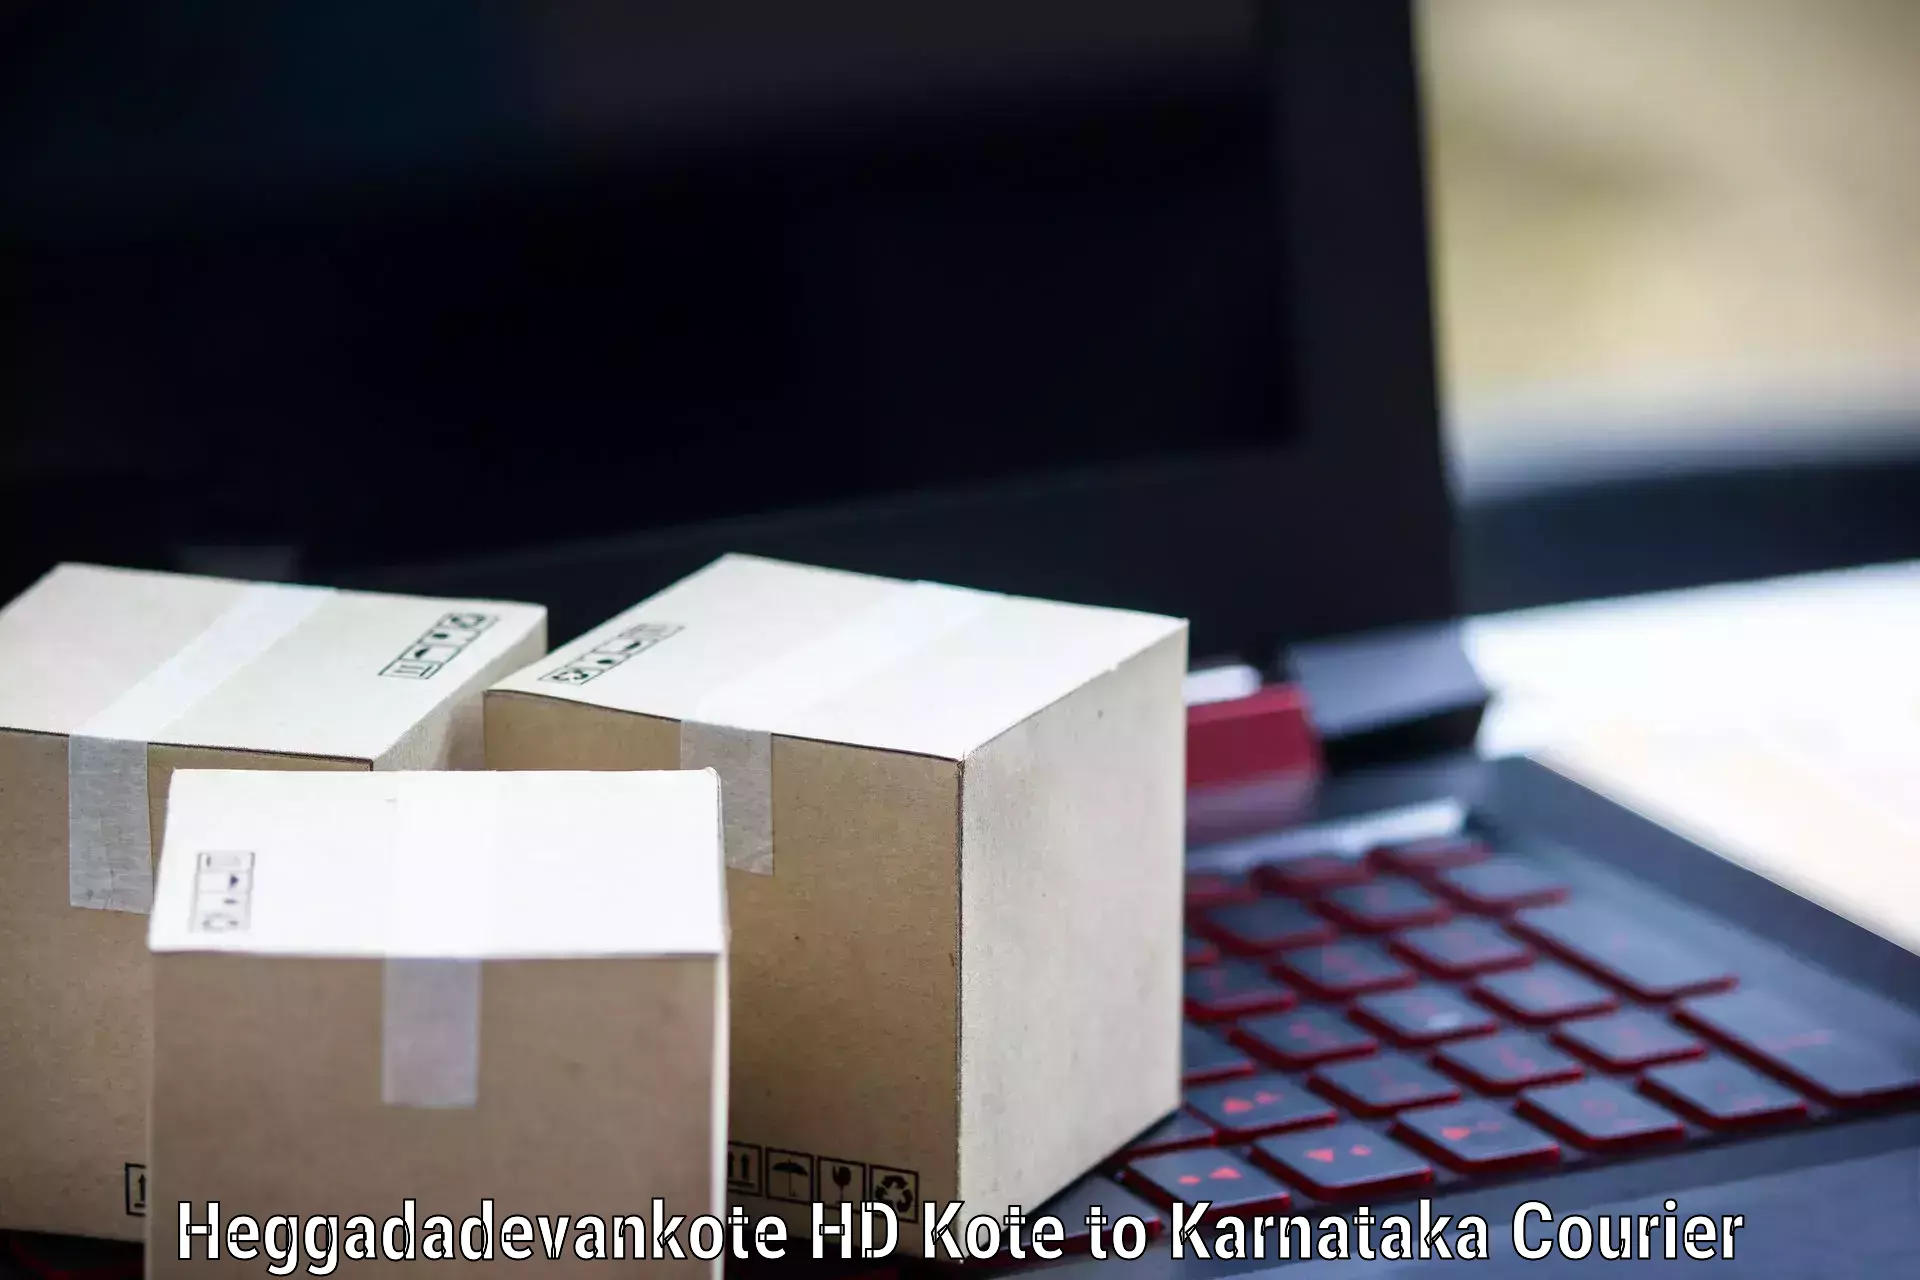 Overnight delivery in Heggadadevankote HD Kote to Chikkamagalur